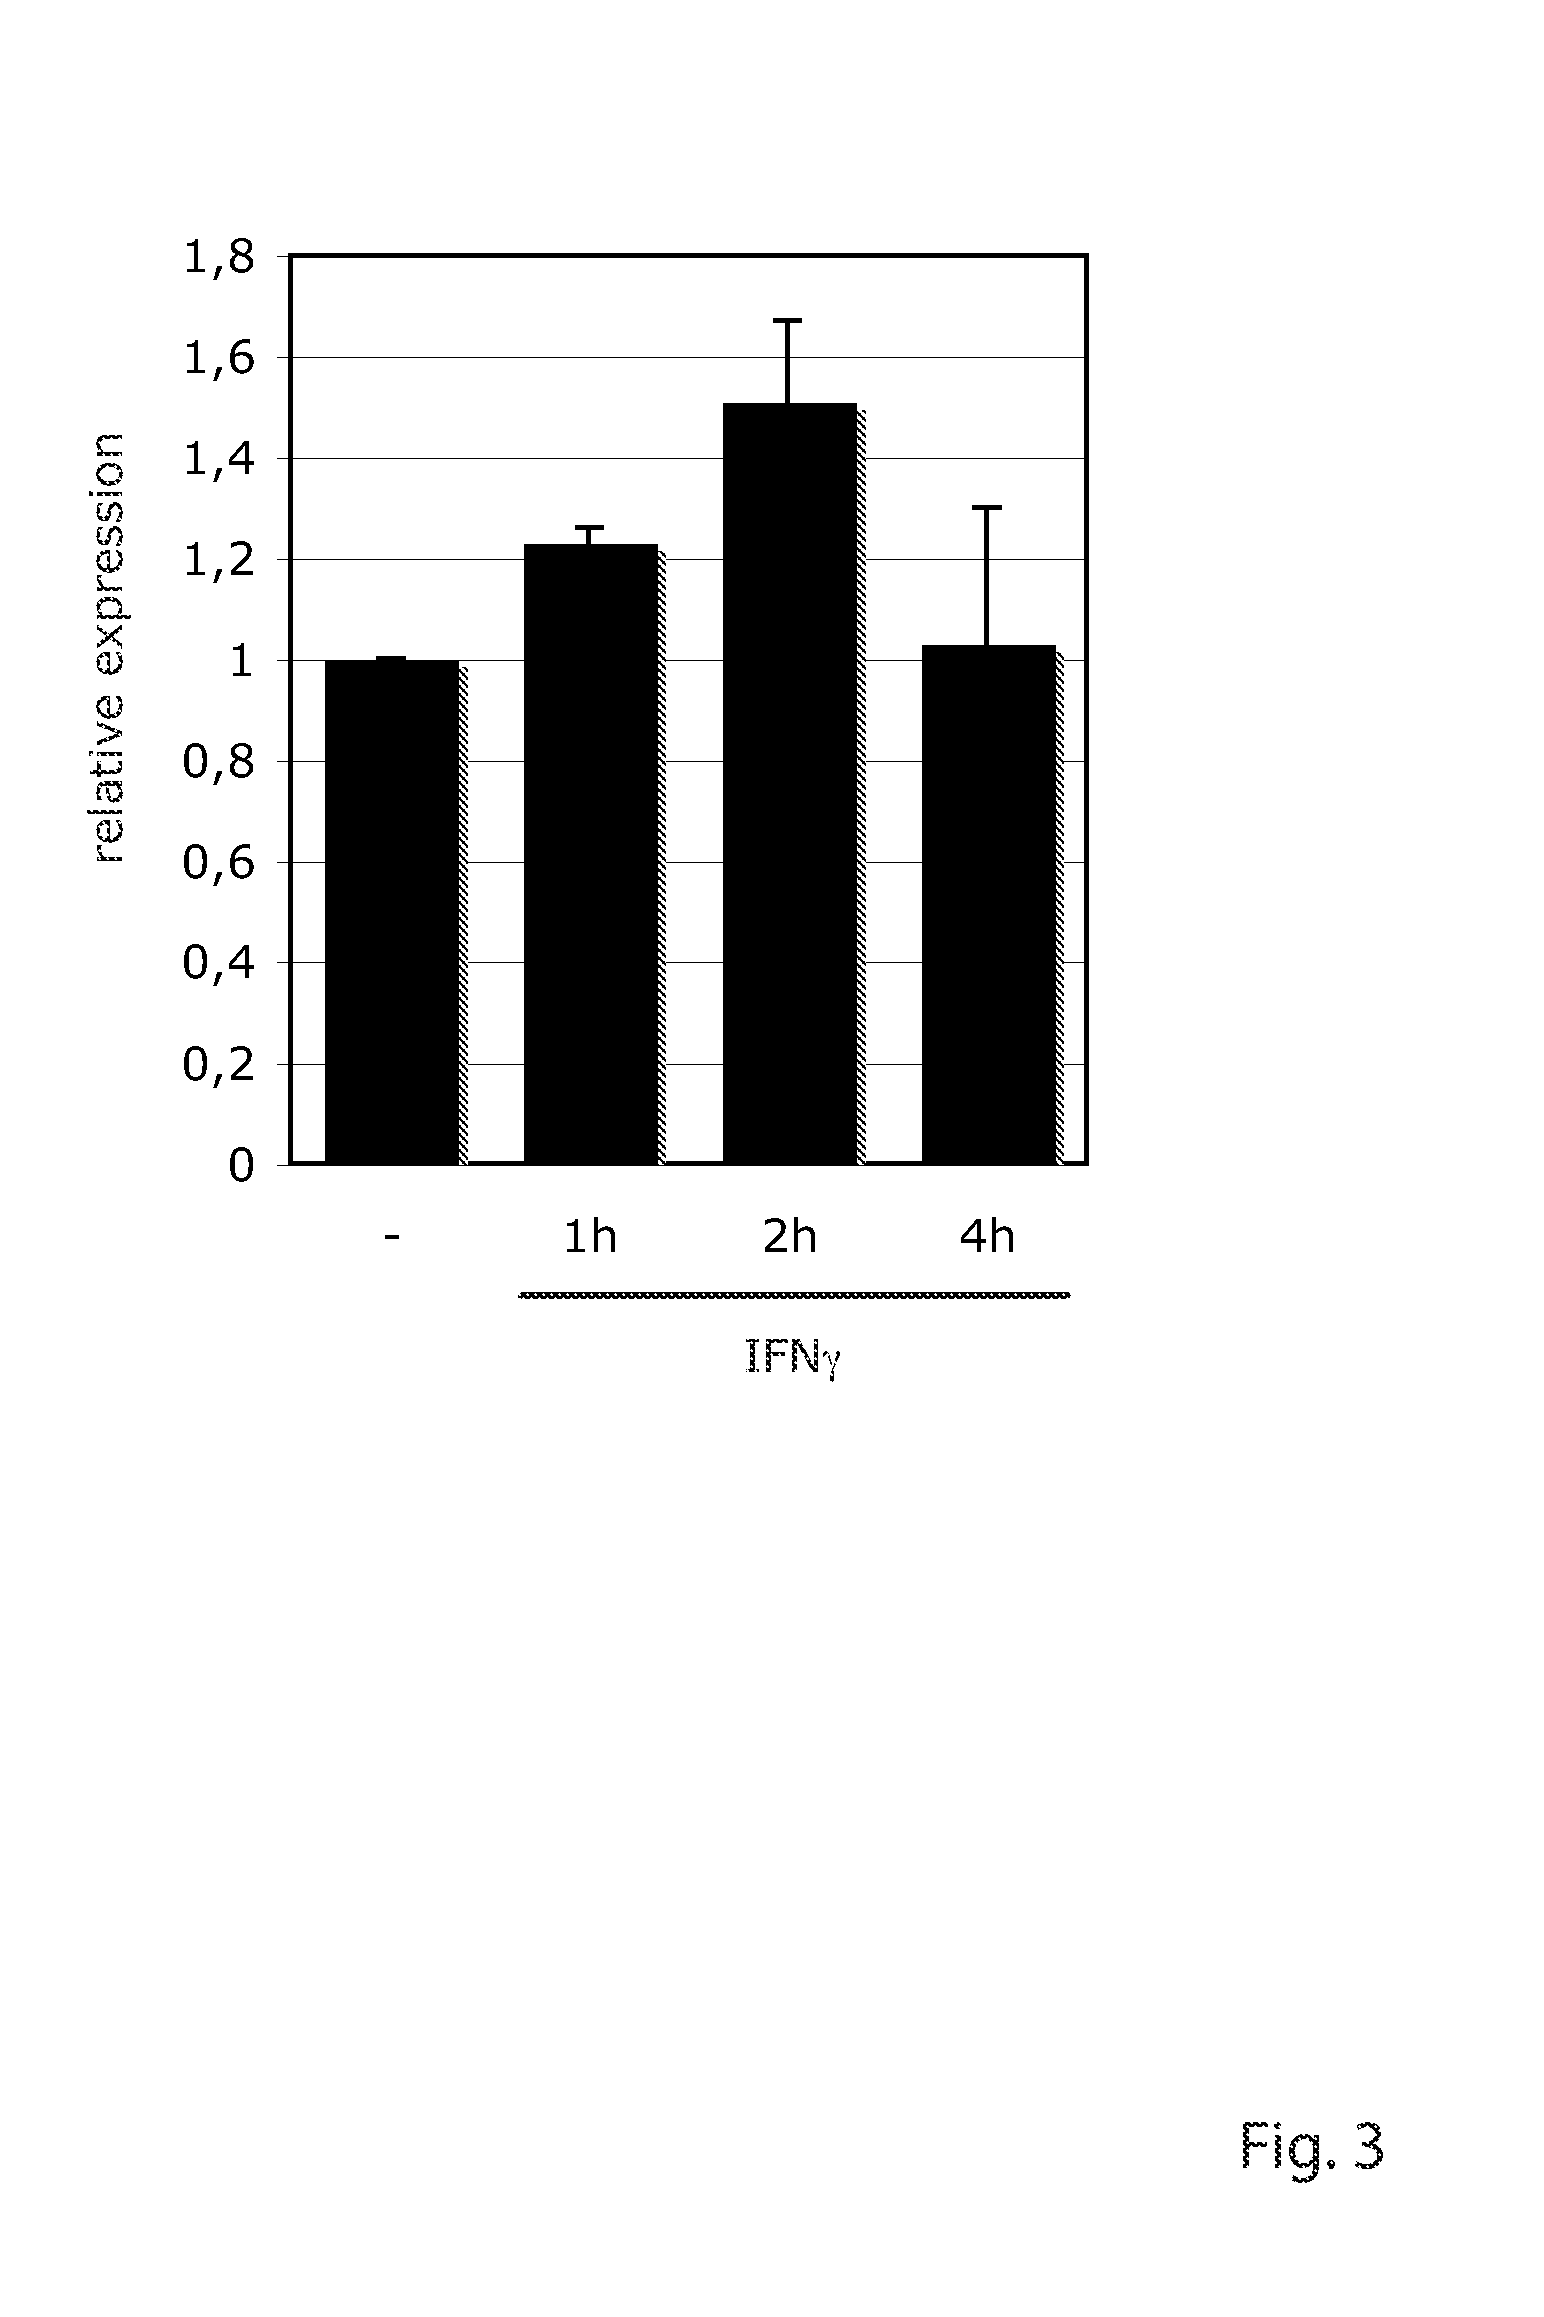 Methods for treating Friedreich's ataxia with interferon gamma